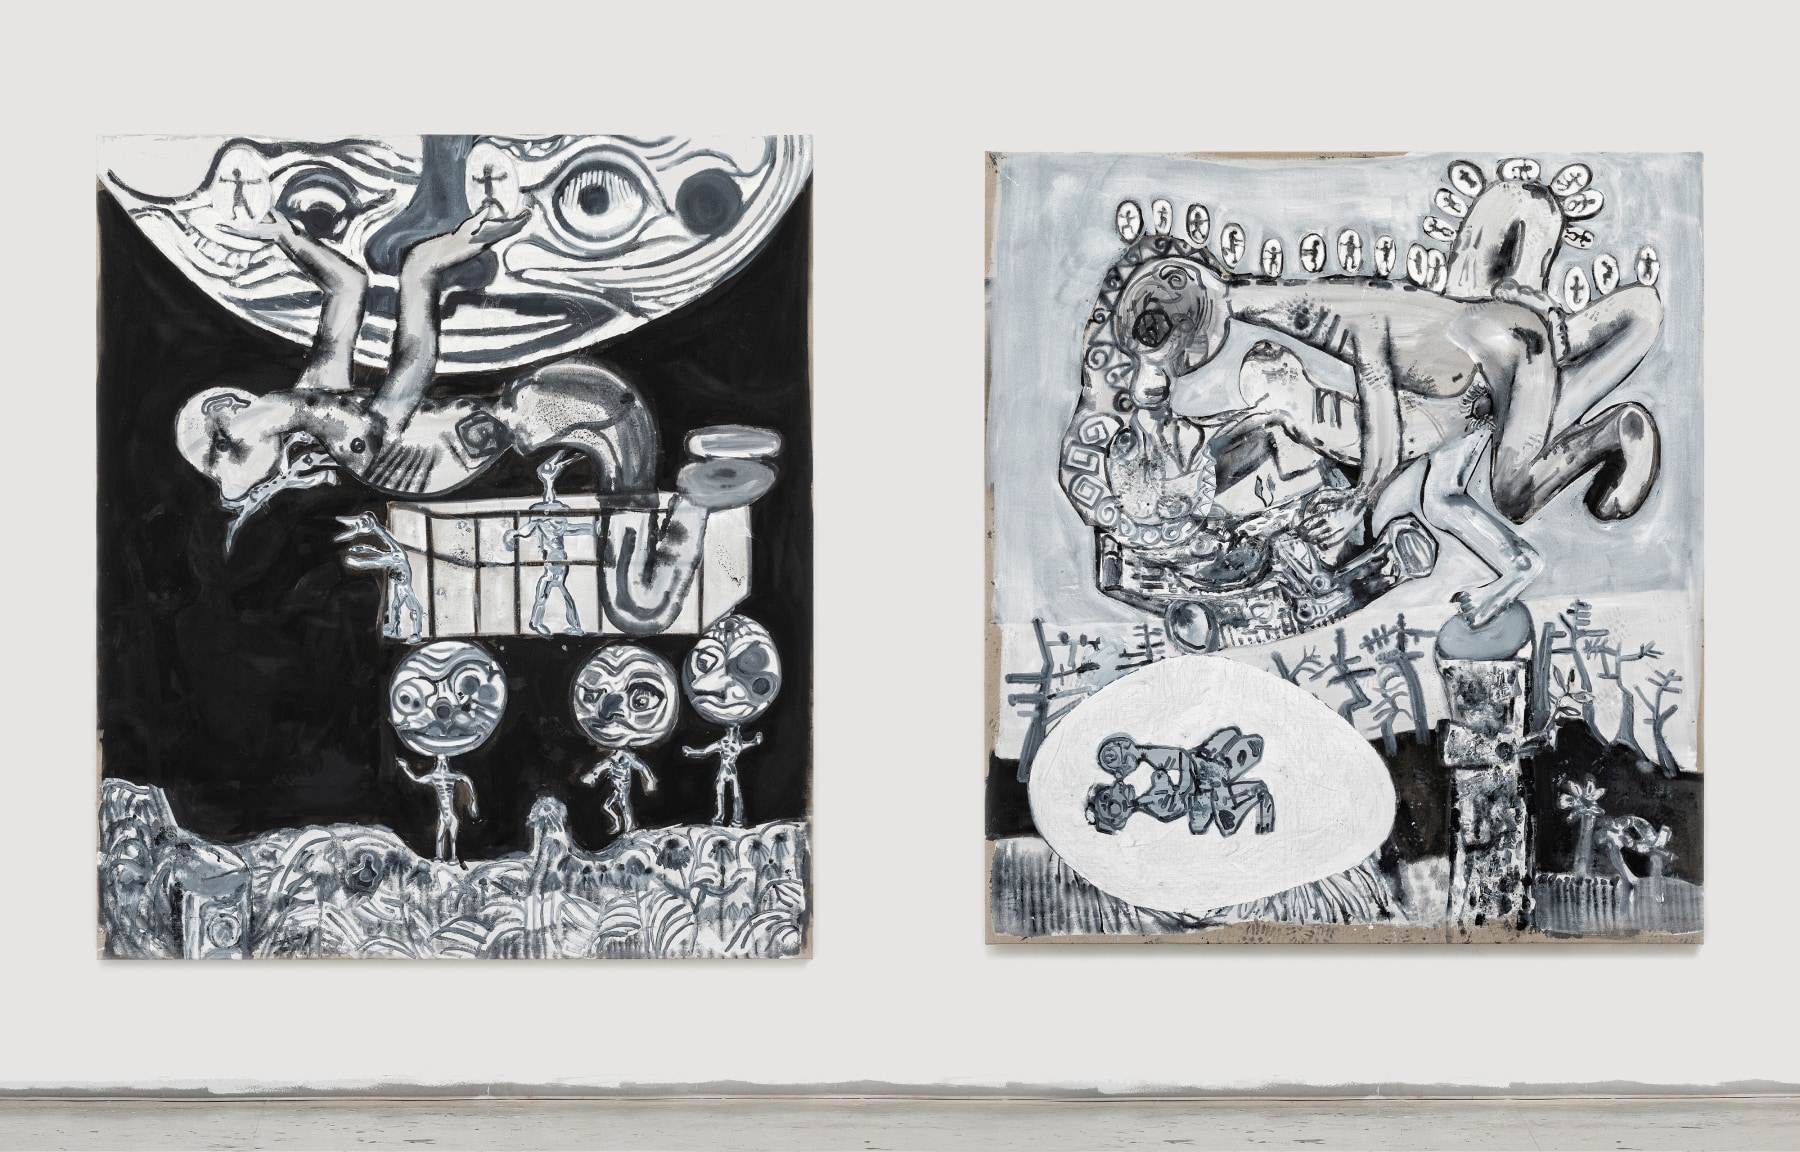 Left:&amp;nbsp;Balancing, 2020, mixed media on canvas, 90 1/2 x 78 3/4 x 1 1/2 inches (230 x 200 x 4 cm)
Right:&amp;nbsp;Coupling 1, 2020, mixed media on canvas, 86 5/8 x 78 3/4 x 1 1/2 inches (220 x 200 x 4 cm)
&amp;nbsp;